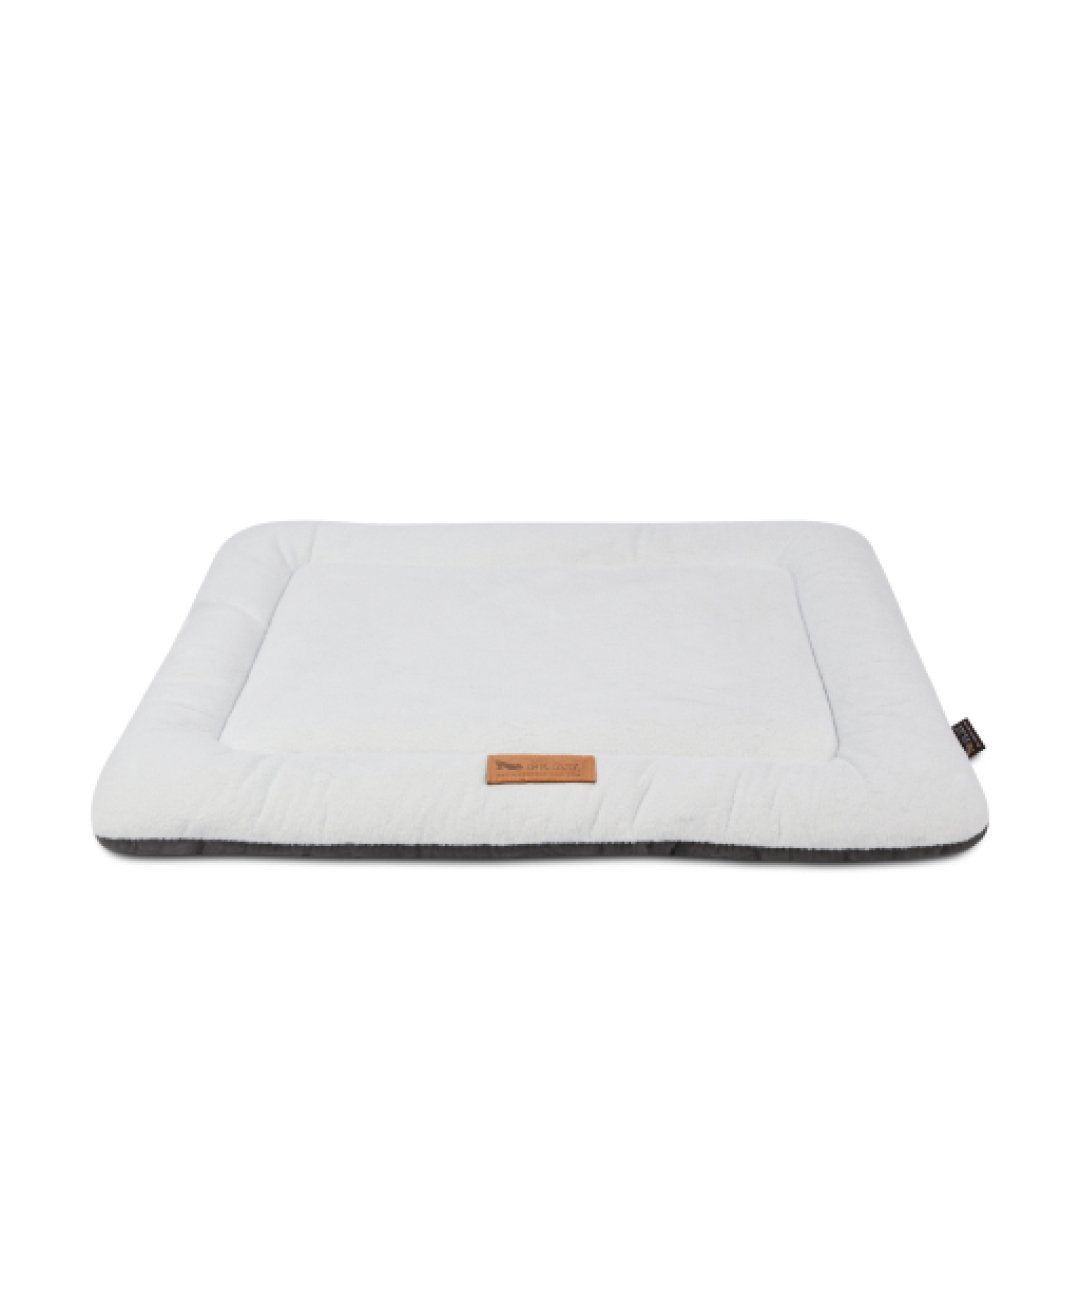 P.L.A.Y. Pet Pad Bed Dog Bed PLAY XS White 